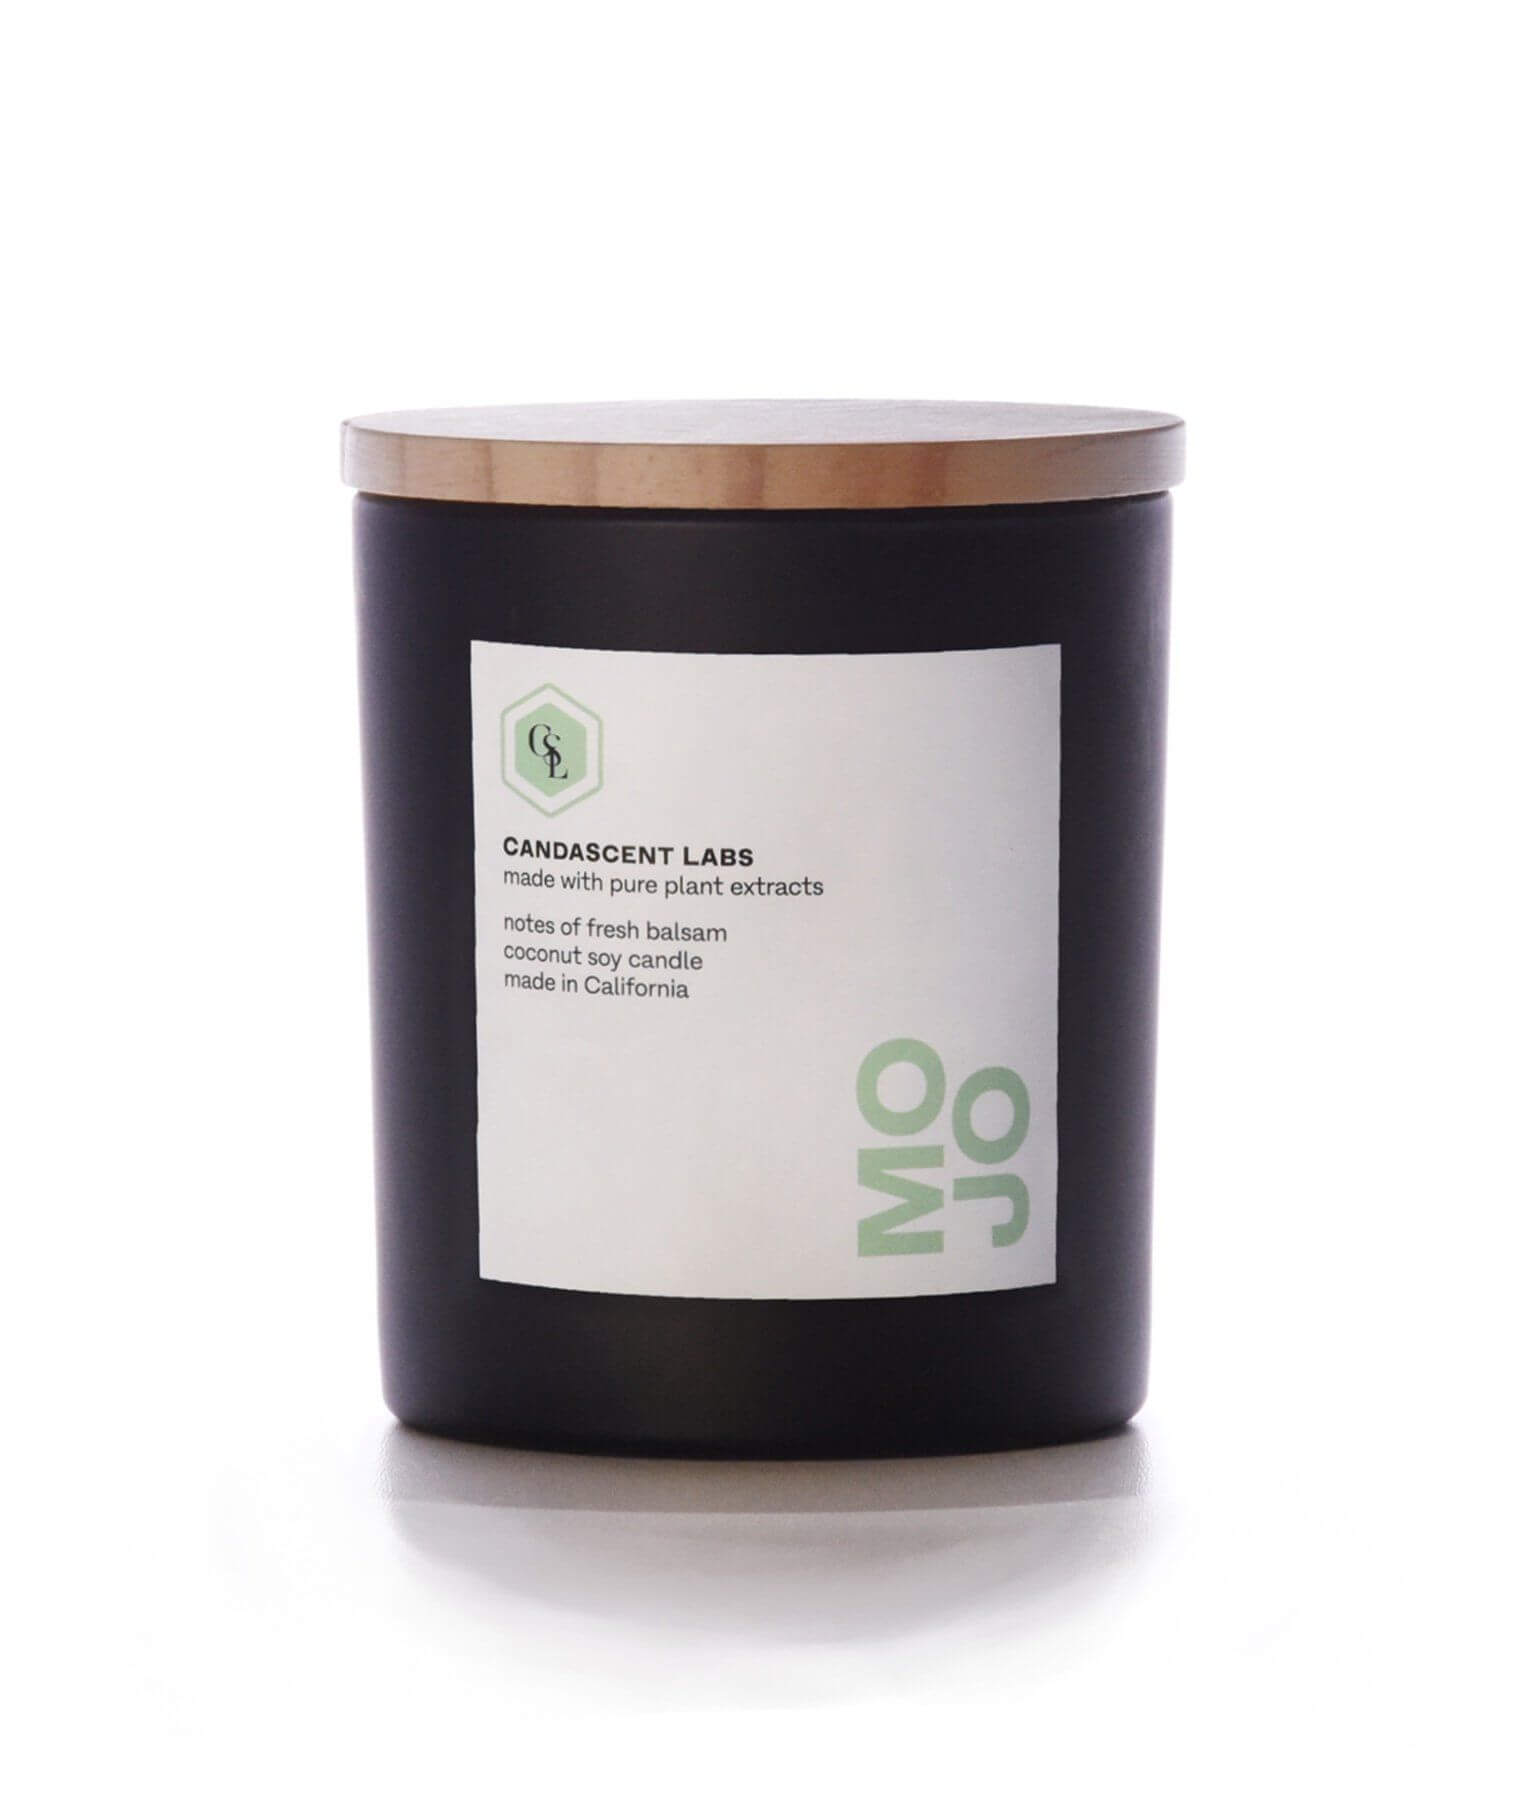 Mojo - Forest Bathing Wellness Candle One Size Candascent Labs